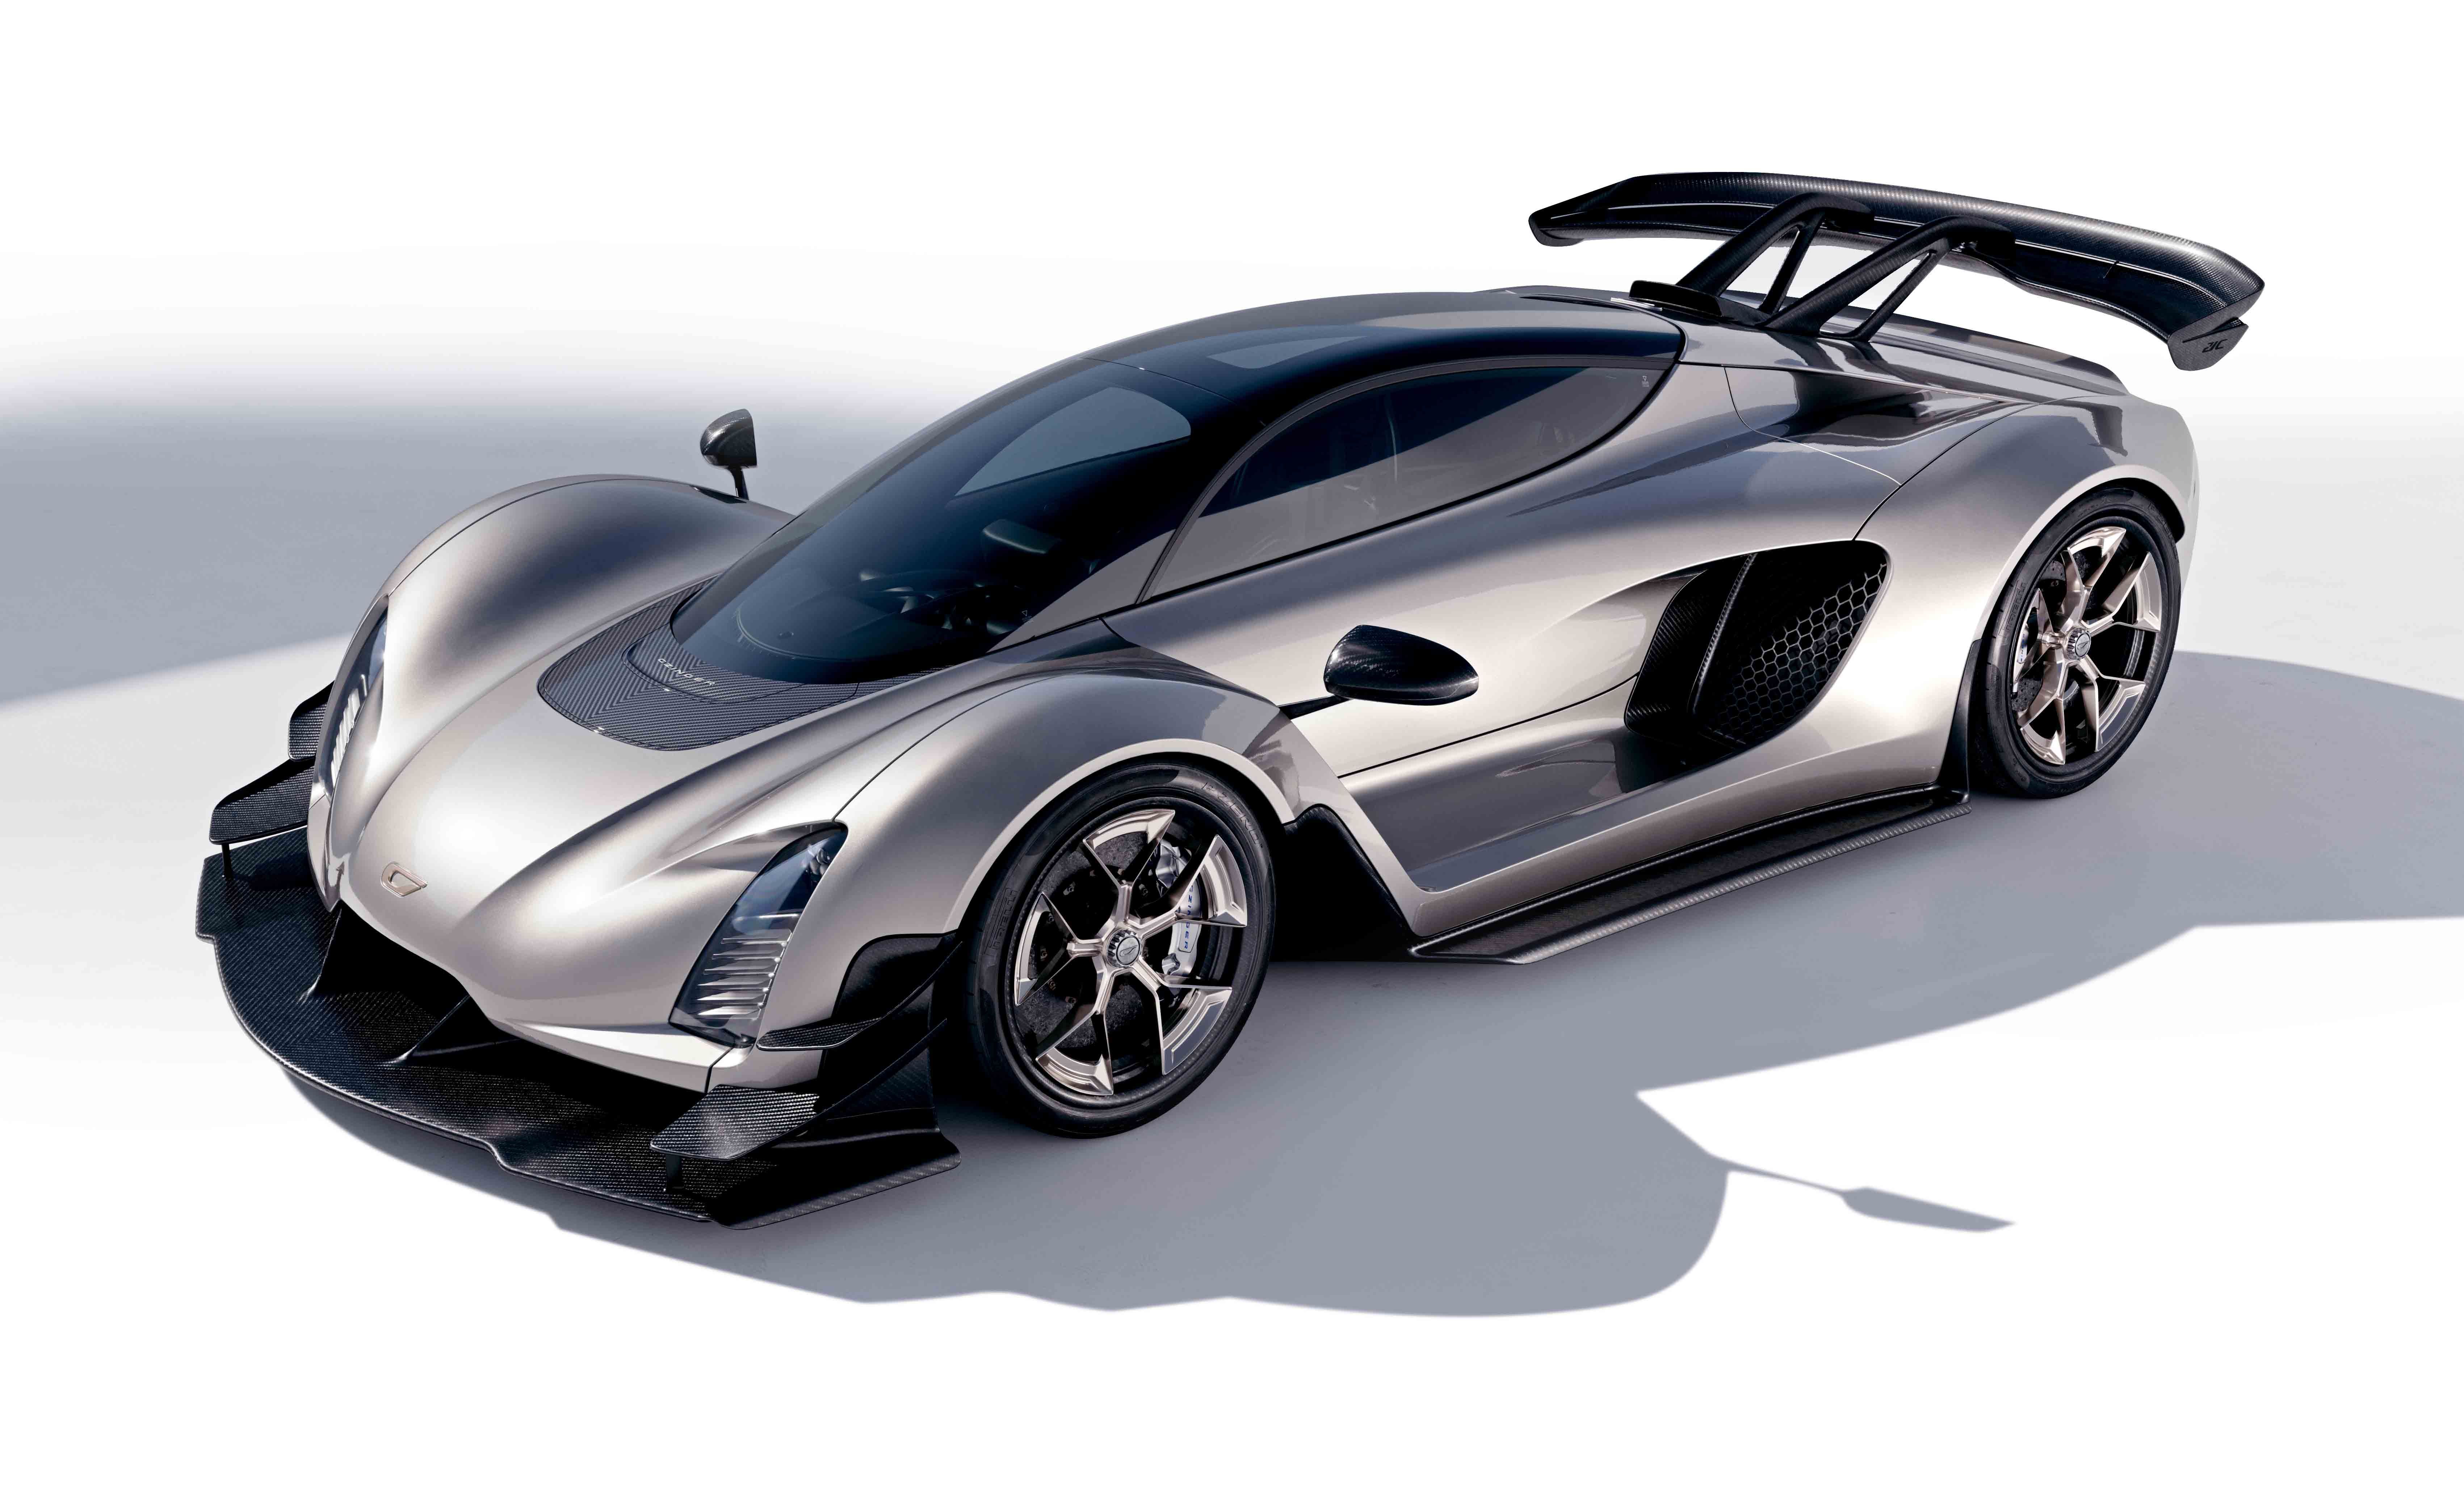 Does the Czinger Supercar 3D-Printed of Car Making?